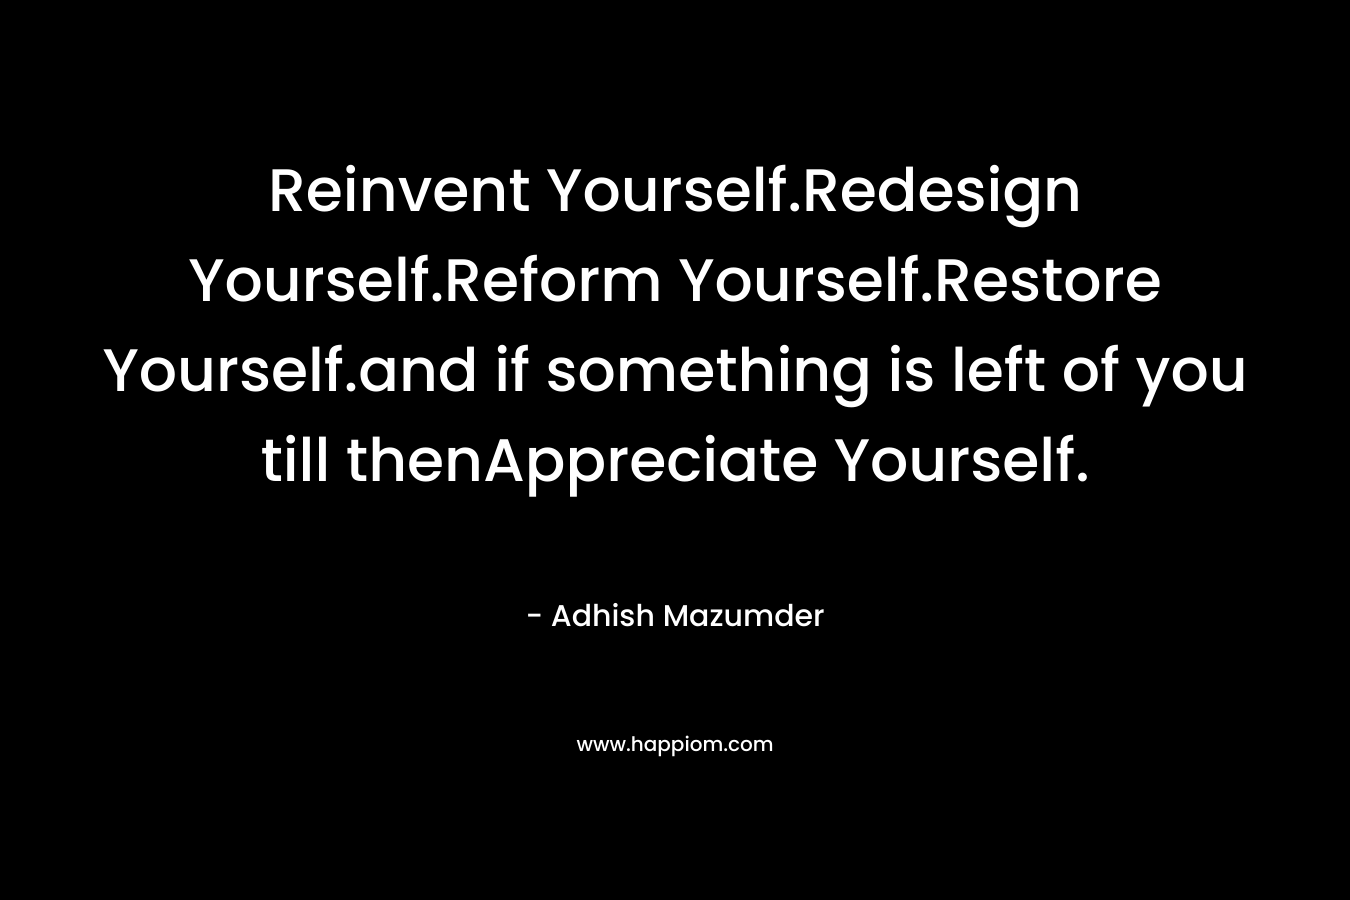 Reinvent Yourself.Redesign Yourself.Reform Yourself.Restore Yourself.and if something is left of you till thenAppreciate Yourself.